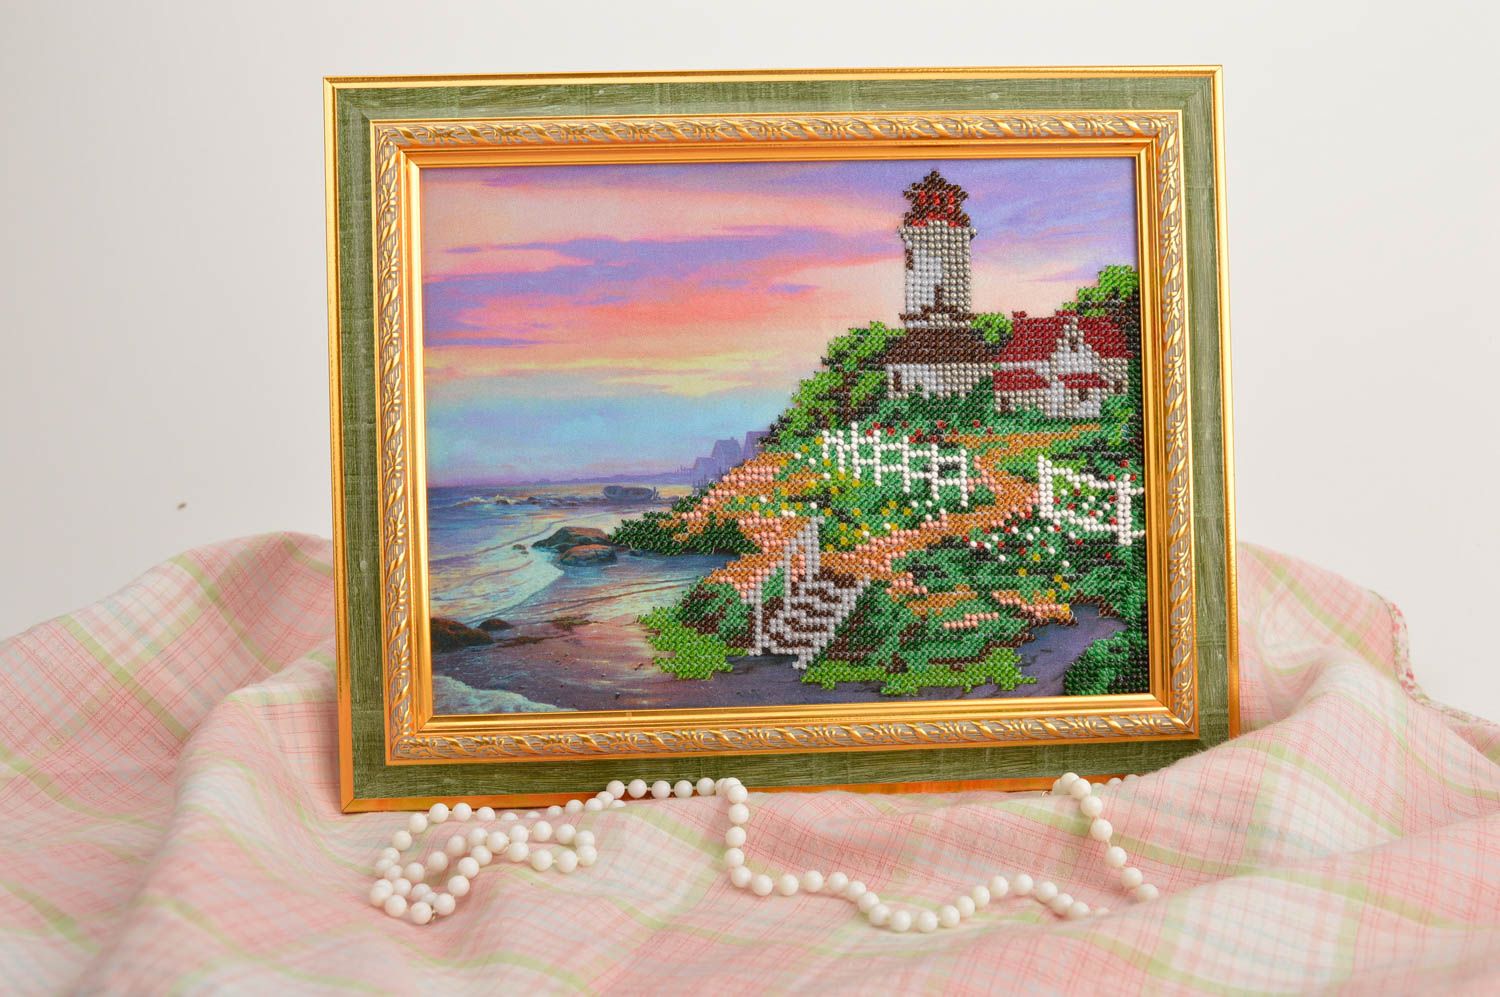 Unusual handmade bead embroidery cool rooms modern art decorative use only photo 1